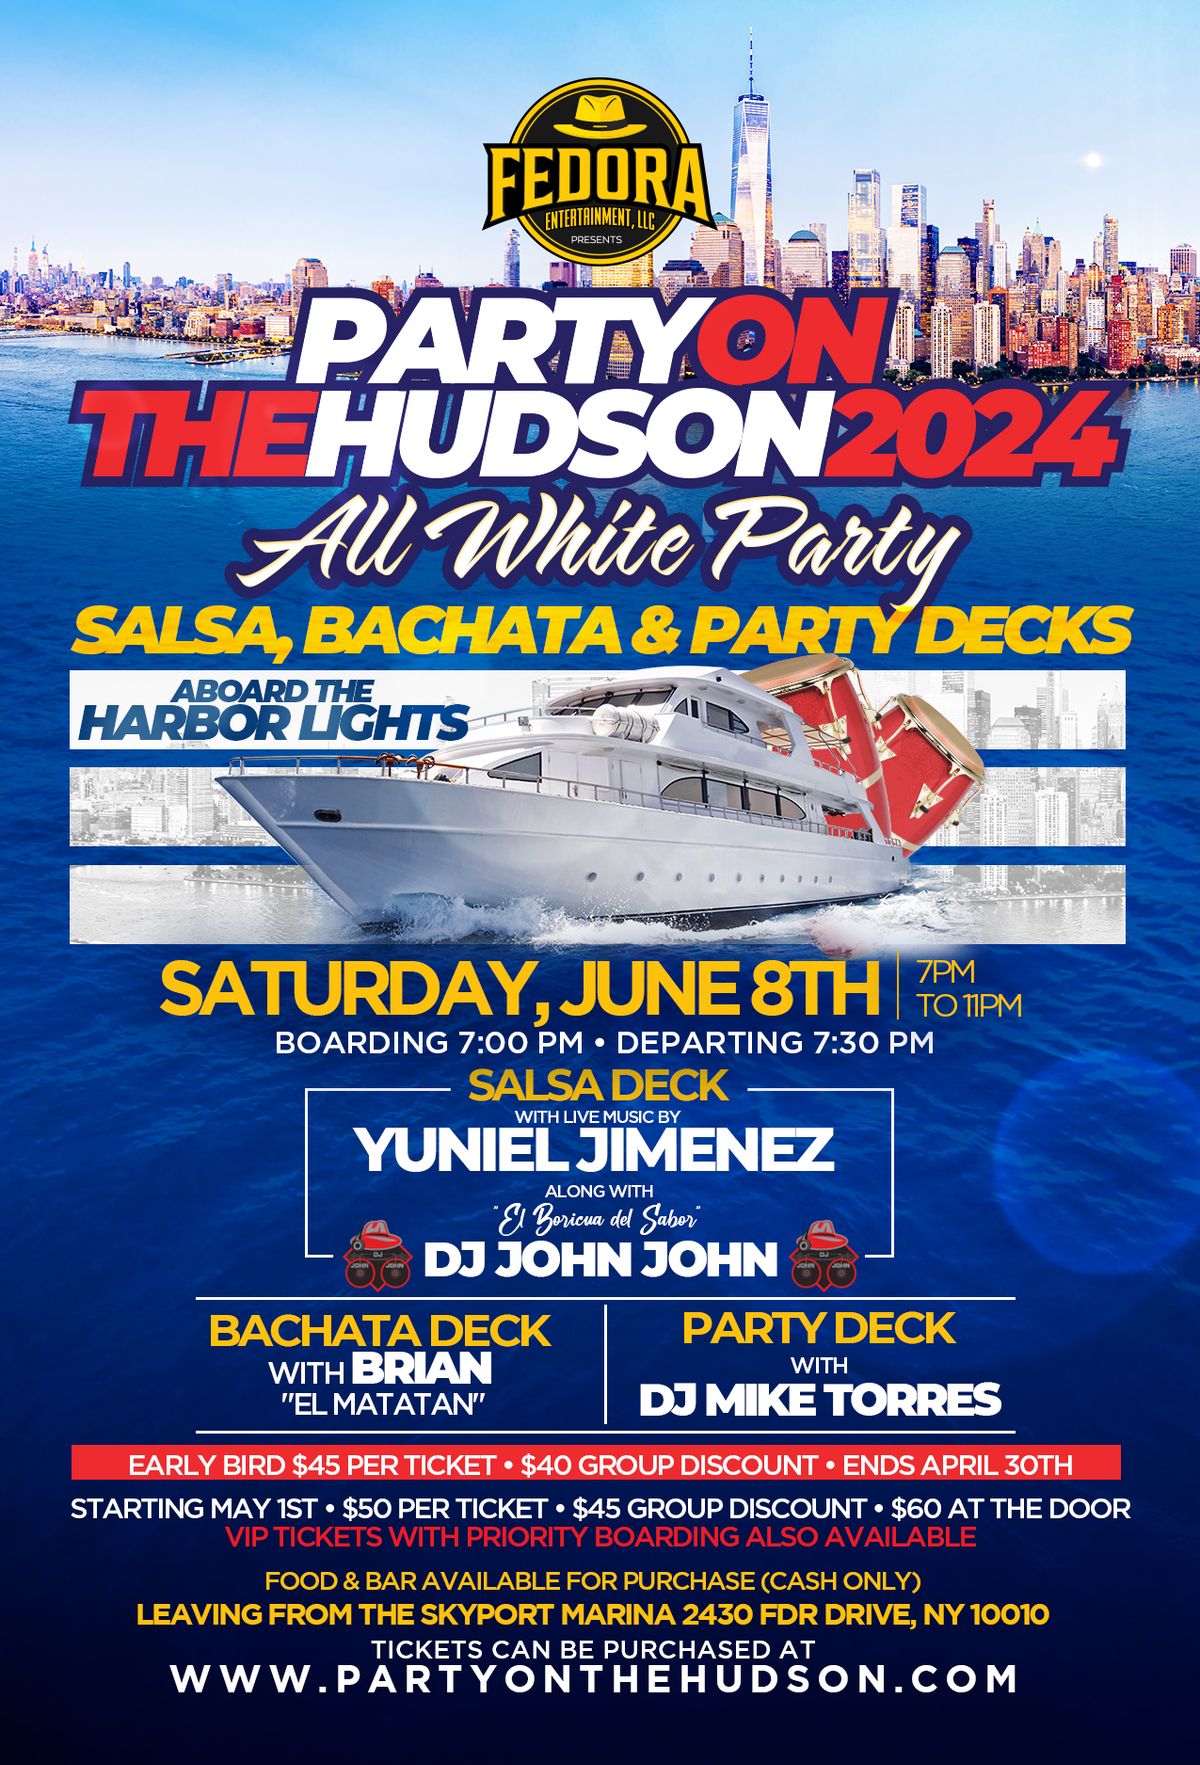 Party On The Hudson ALL WHITE THEME PARTY with Live Music, Salsa, Bachata & Party Decks